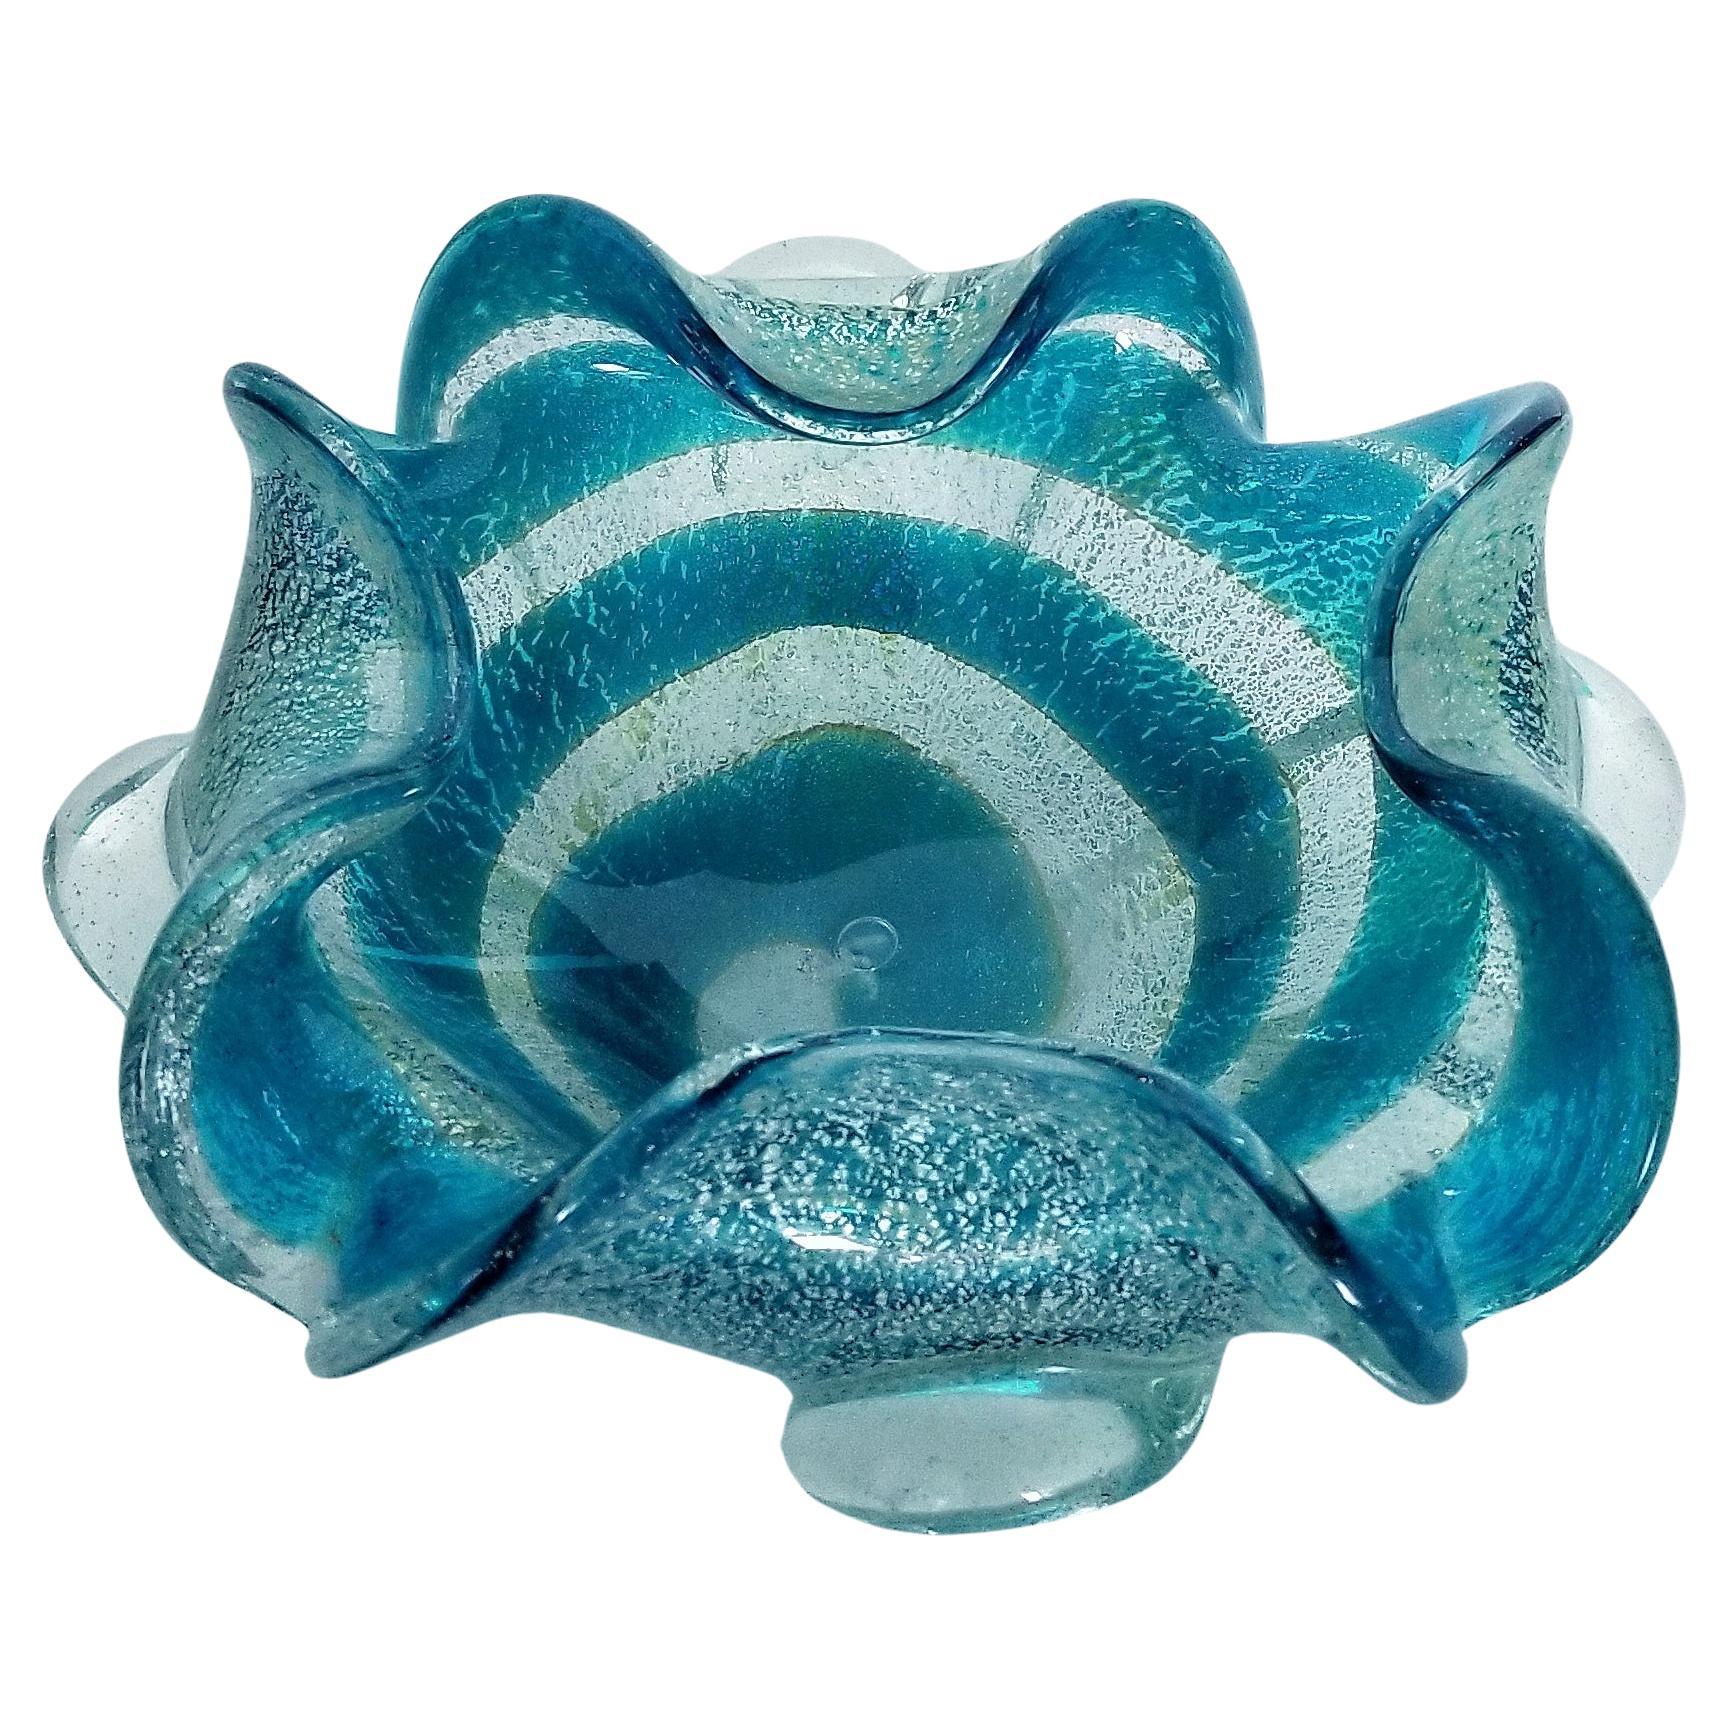 20th Century Blue and Silver Murano Glass Ashtray or Catch-all Bowl For Sale